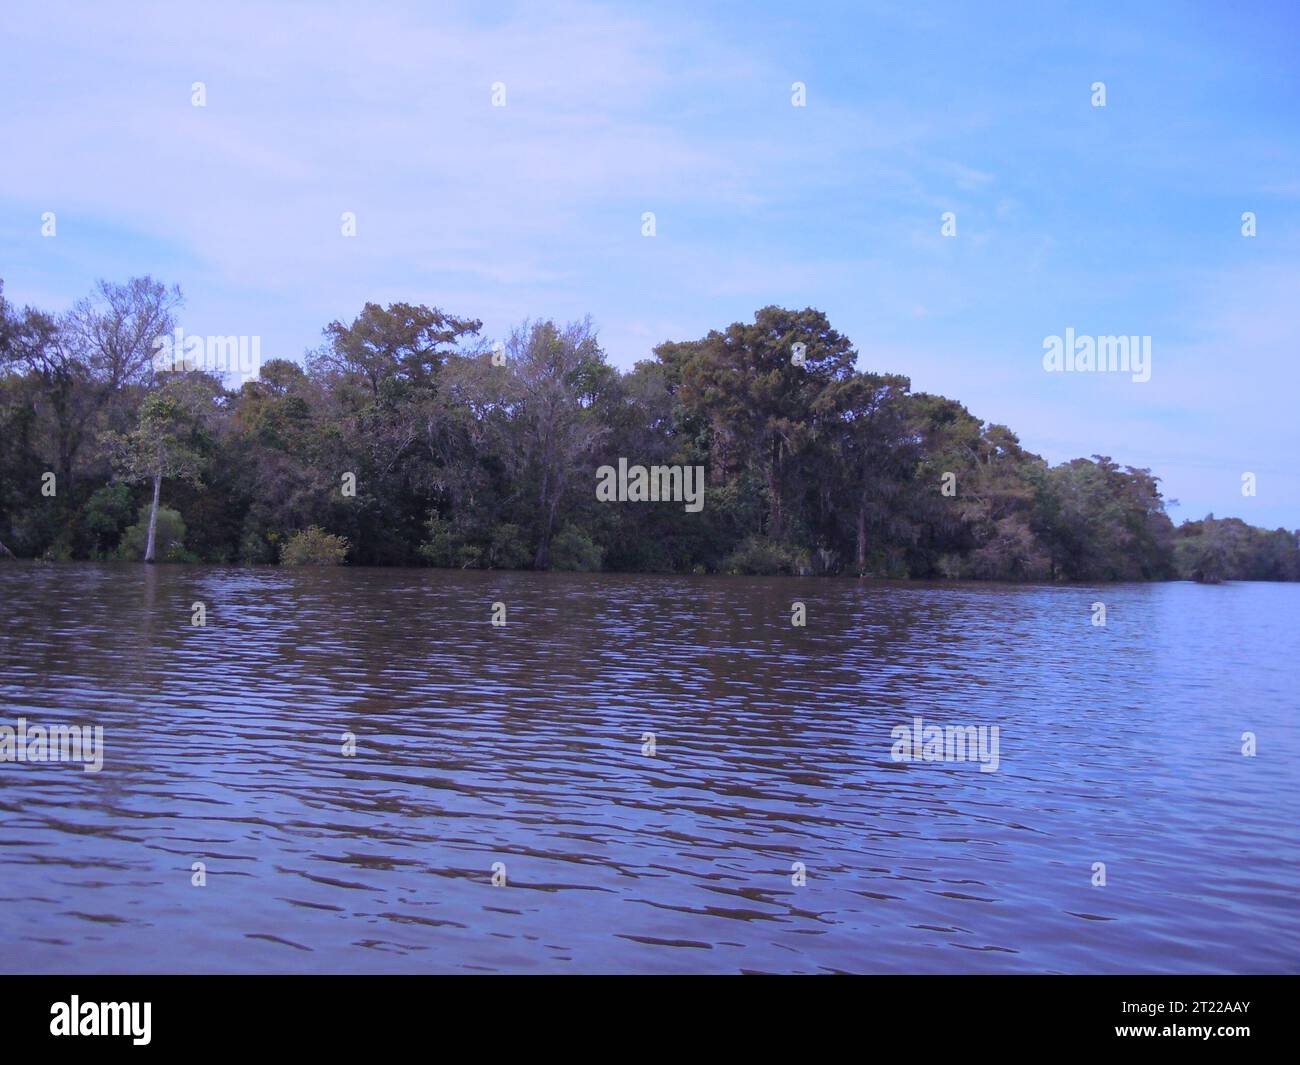 A healthy bottomland forest habitat off the Waccamaw River is photographed at Waccamaw National Wildlife Refuge, SC. Subjects: Forests; Wildlife refuges. Location: South Carolina. Fish and Wildlife Service Site: WACCAMAW NATIONAL WILDLIFE REFUGE. Stock Photo